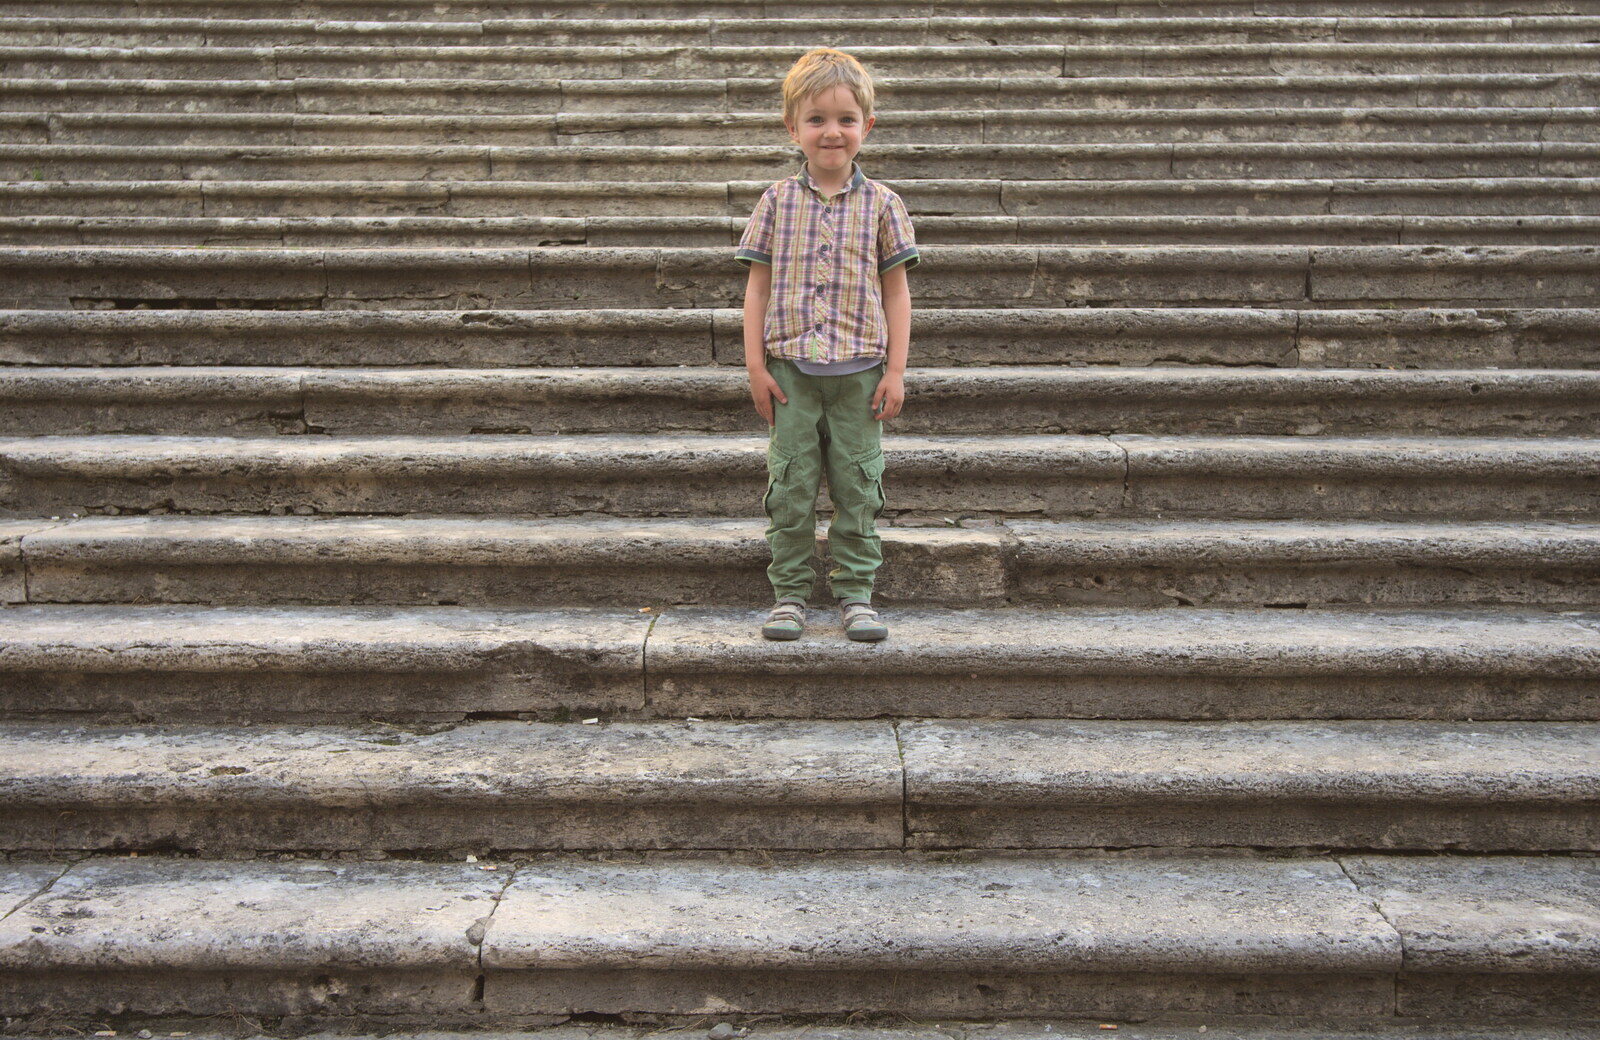 Fred on the steps of the big church in Arezzo from Italian Weddings, Saracens and Swimming Pools, Arezzo, Tuscany - 12th June 2013